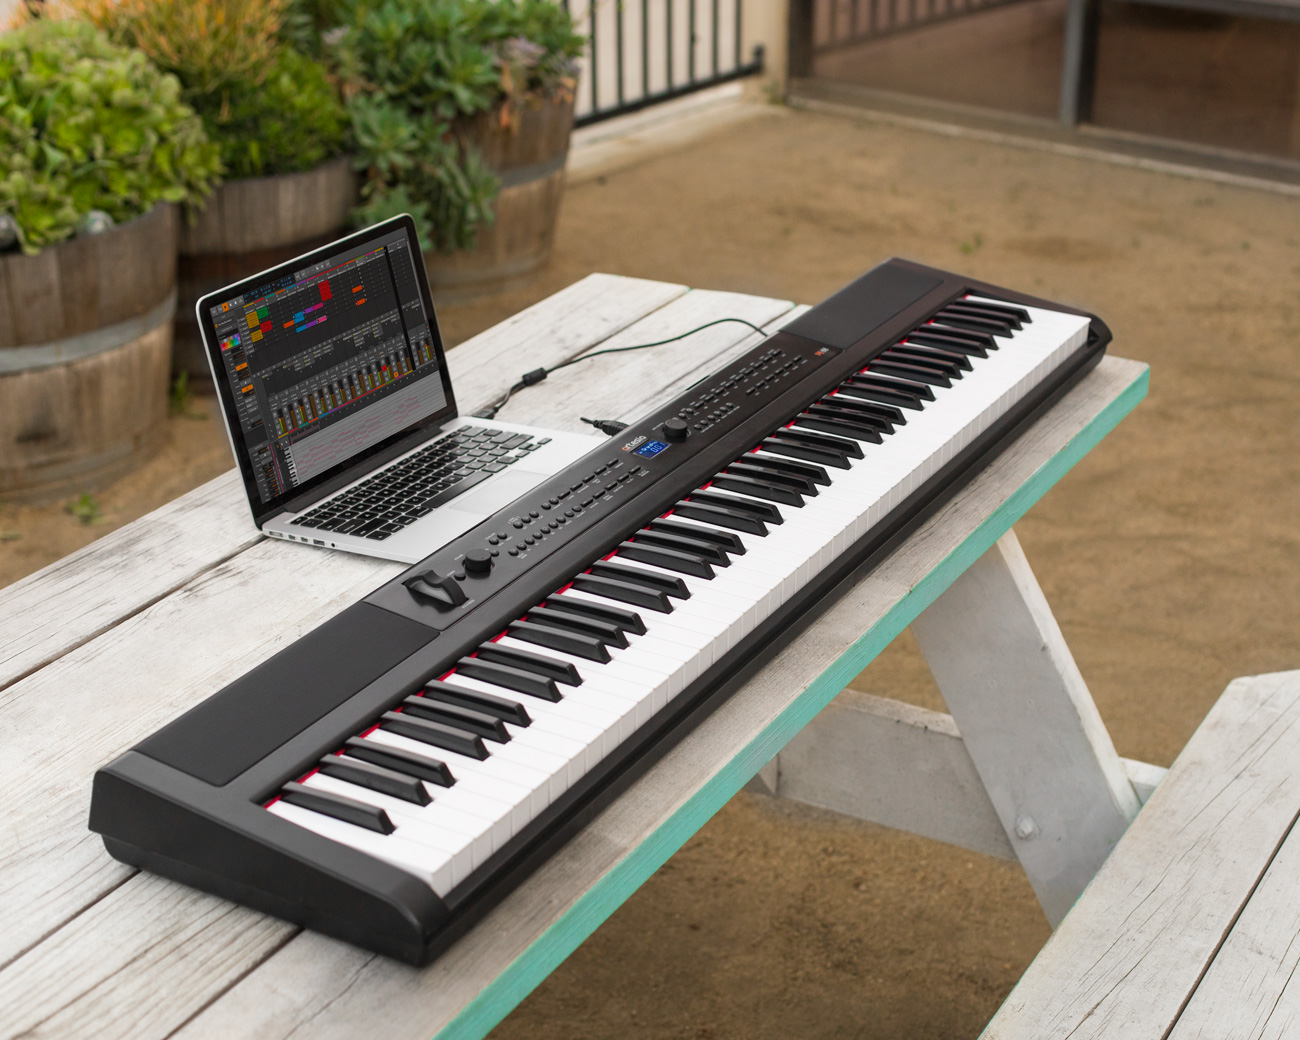 The PE-88 allows you to simply connect your keyboard to your laptop, tablet or smartphone via USB to Host MIDI ports.